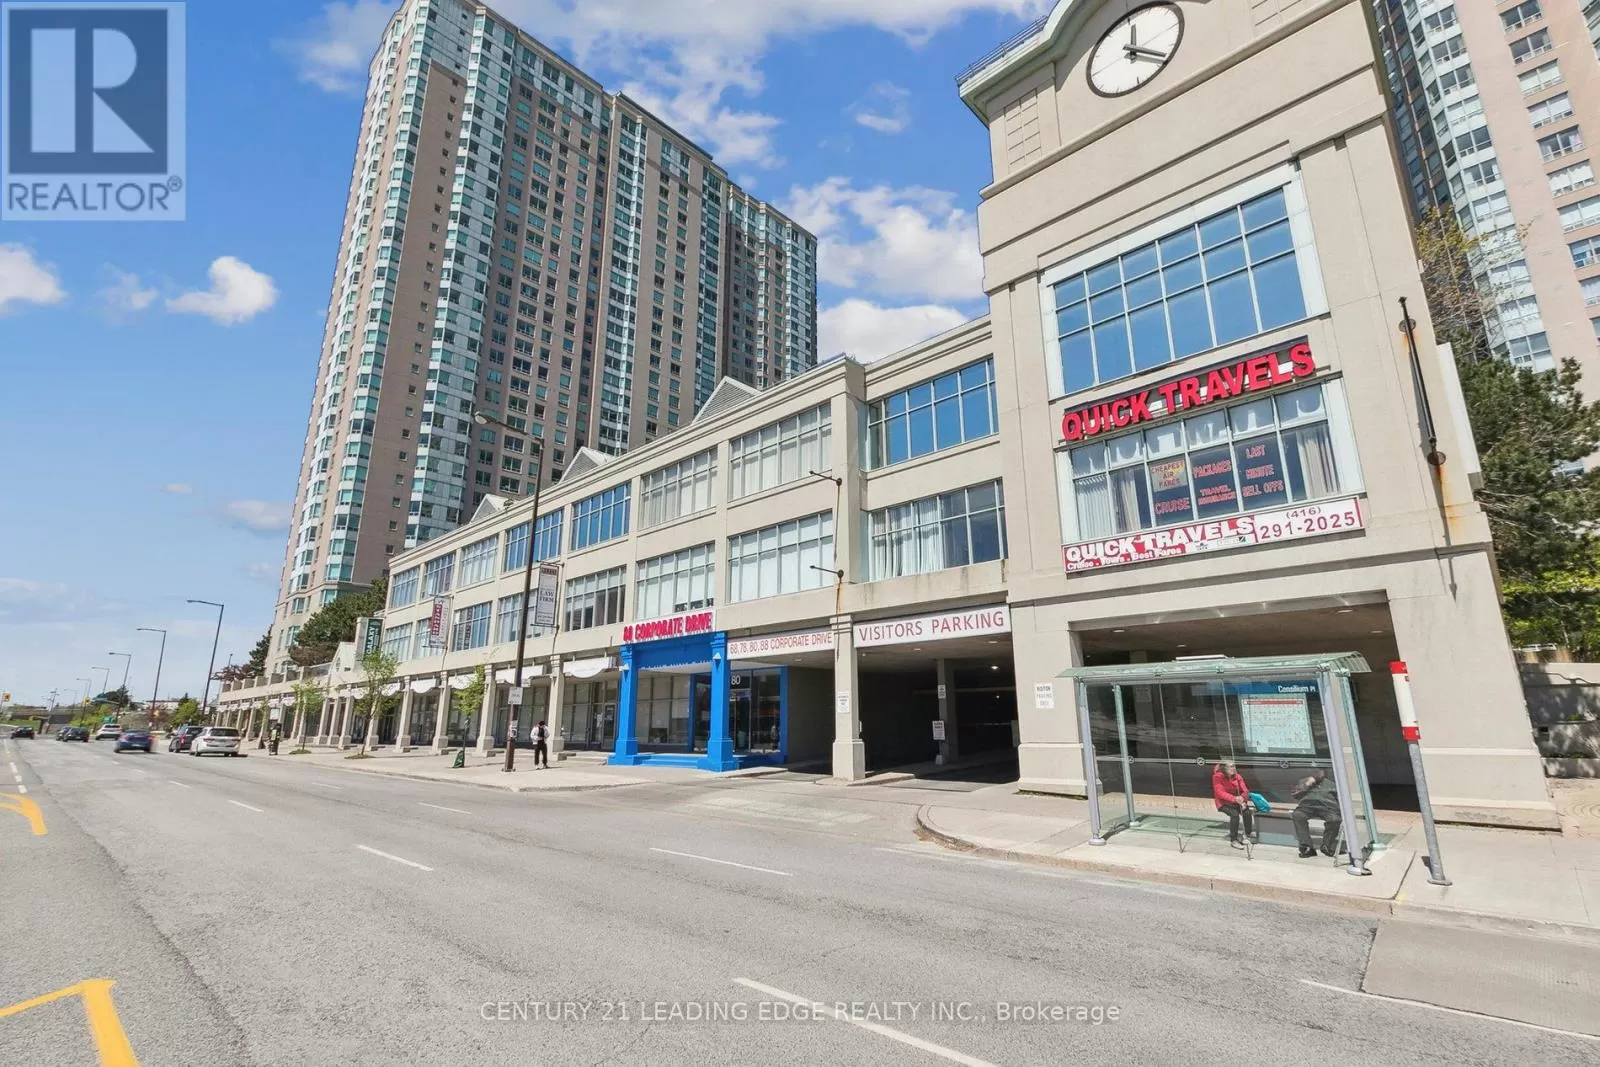 Offices for rent: 206 - 80 Corporate Drive, Toronto, Ontario M1H 3G5